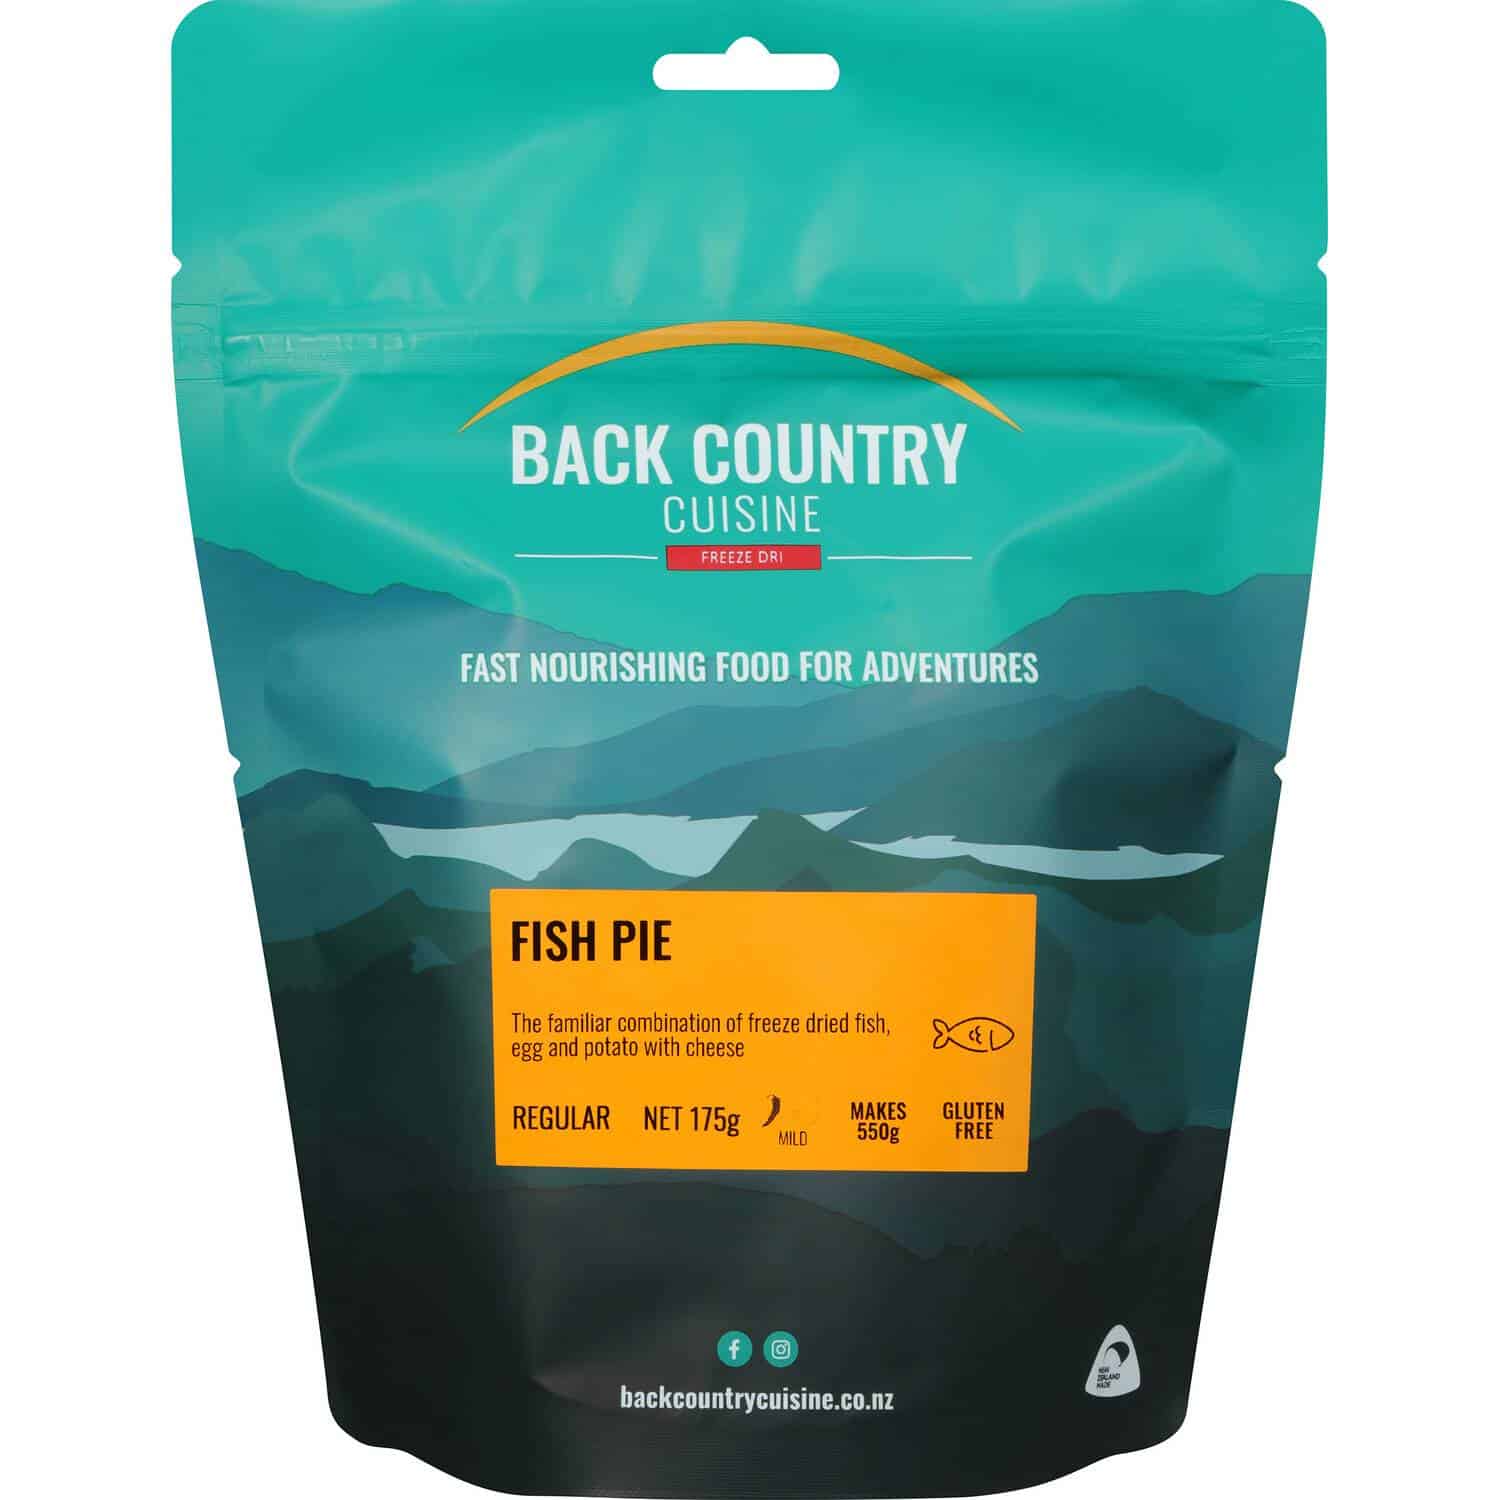 Back Country Cuisine Fish Pie Regular - Tramping Food and Accessories sold by Venture Outdoors NZ